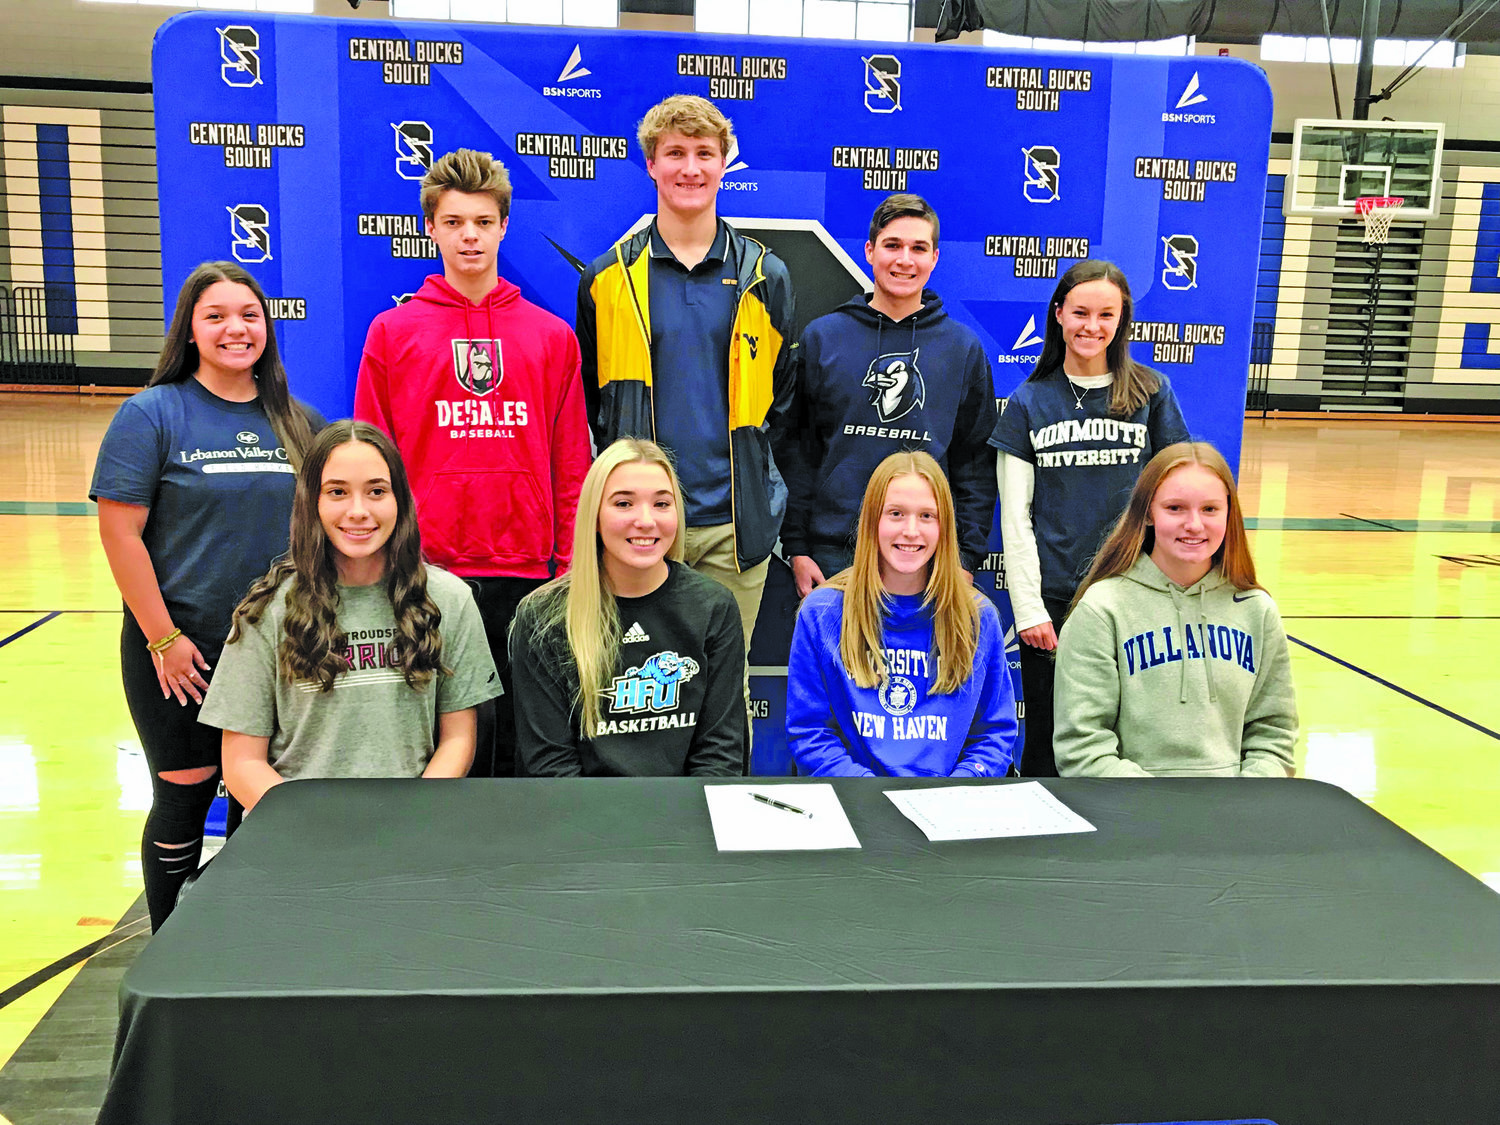 CB South seniors were recently recognized for committing to play collegiate sports. From left are: front row, Julia Cooper, Taylor Hinkle, Erin Smith, Anna Shirley; back row, Kailey Sarrasin, JT Anderosky, Robby Porco, Justin Marraccini and Brianna Jucewicz.